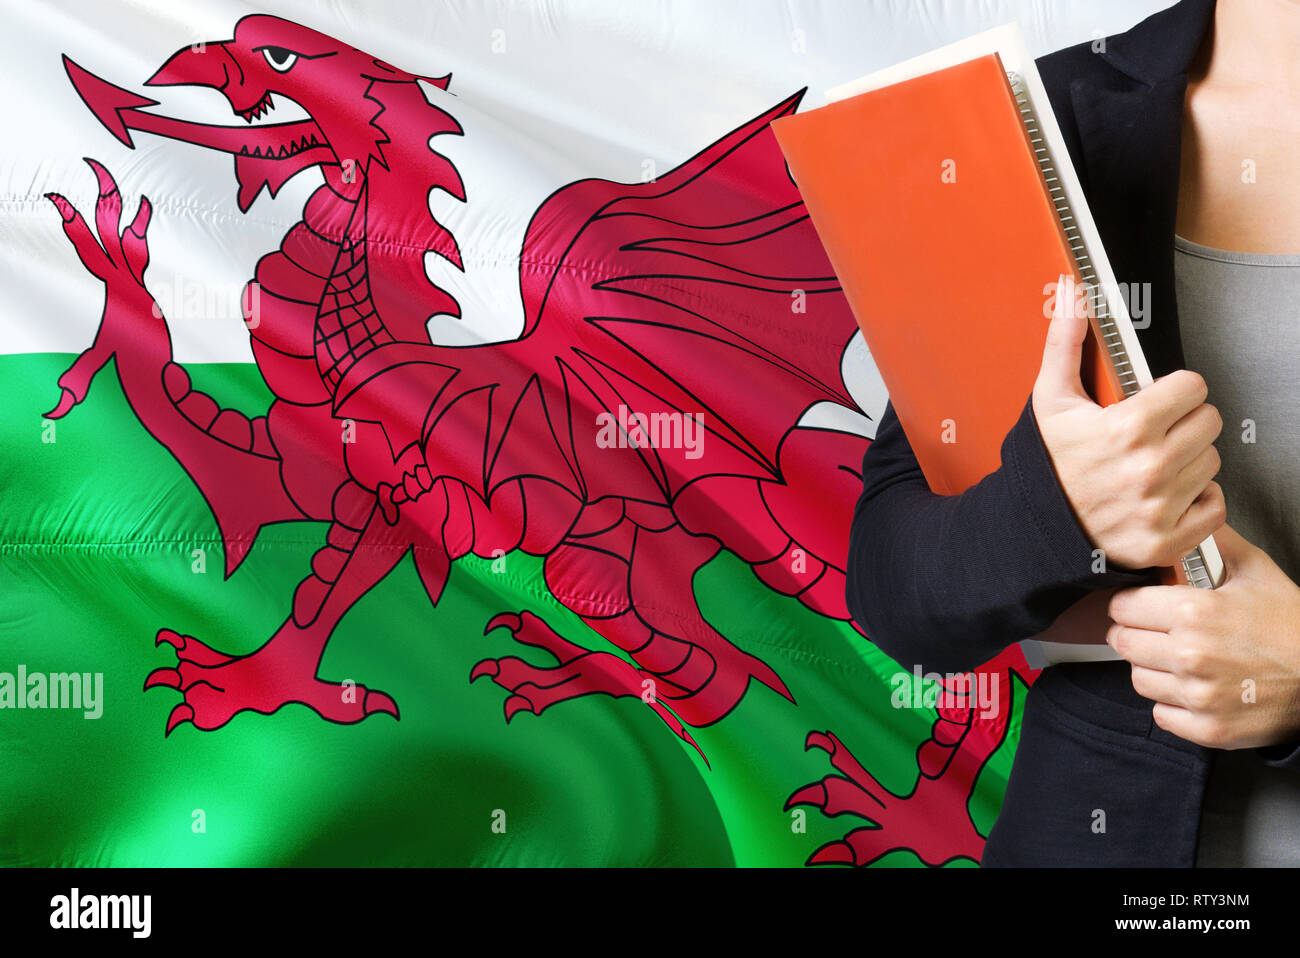 Learning Welsh language concept. Young woman standing with the Wales flag in the background. Teacher holding books, orange blank book cover. Stock Photo